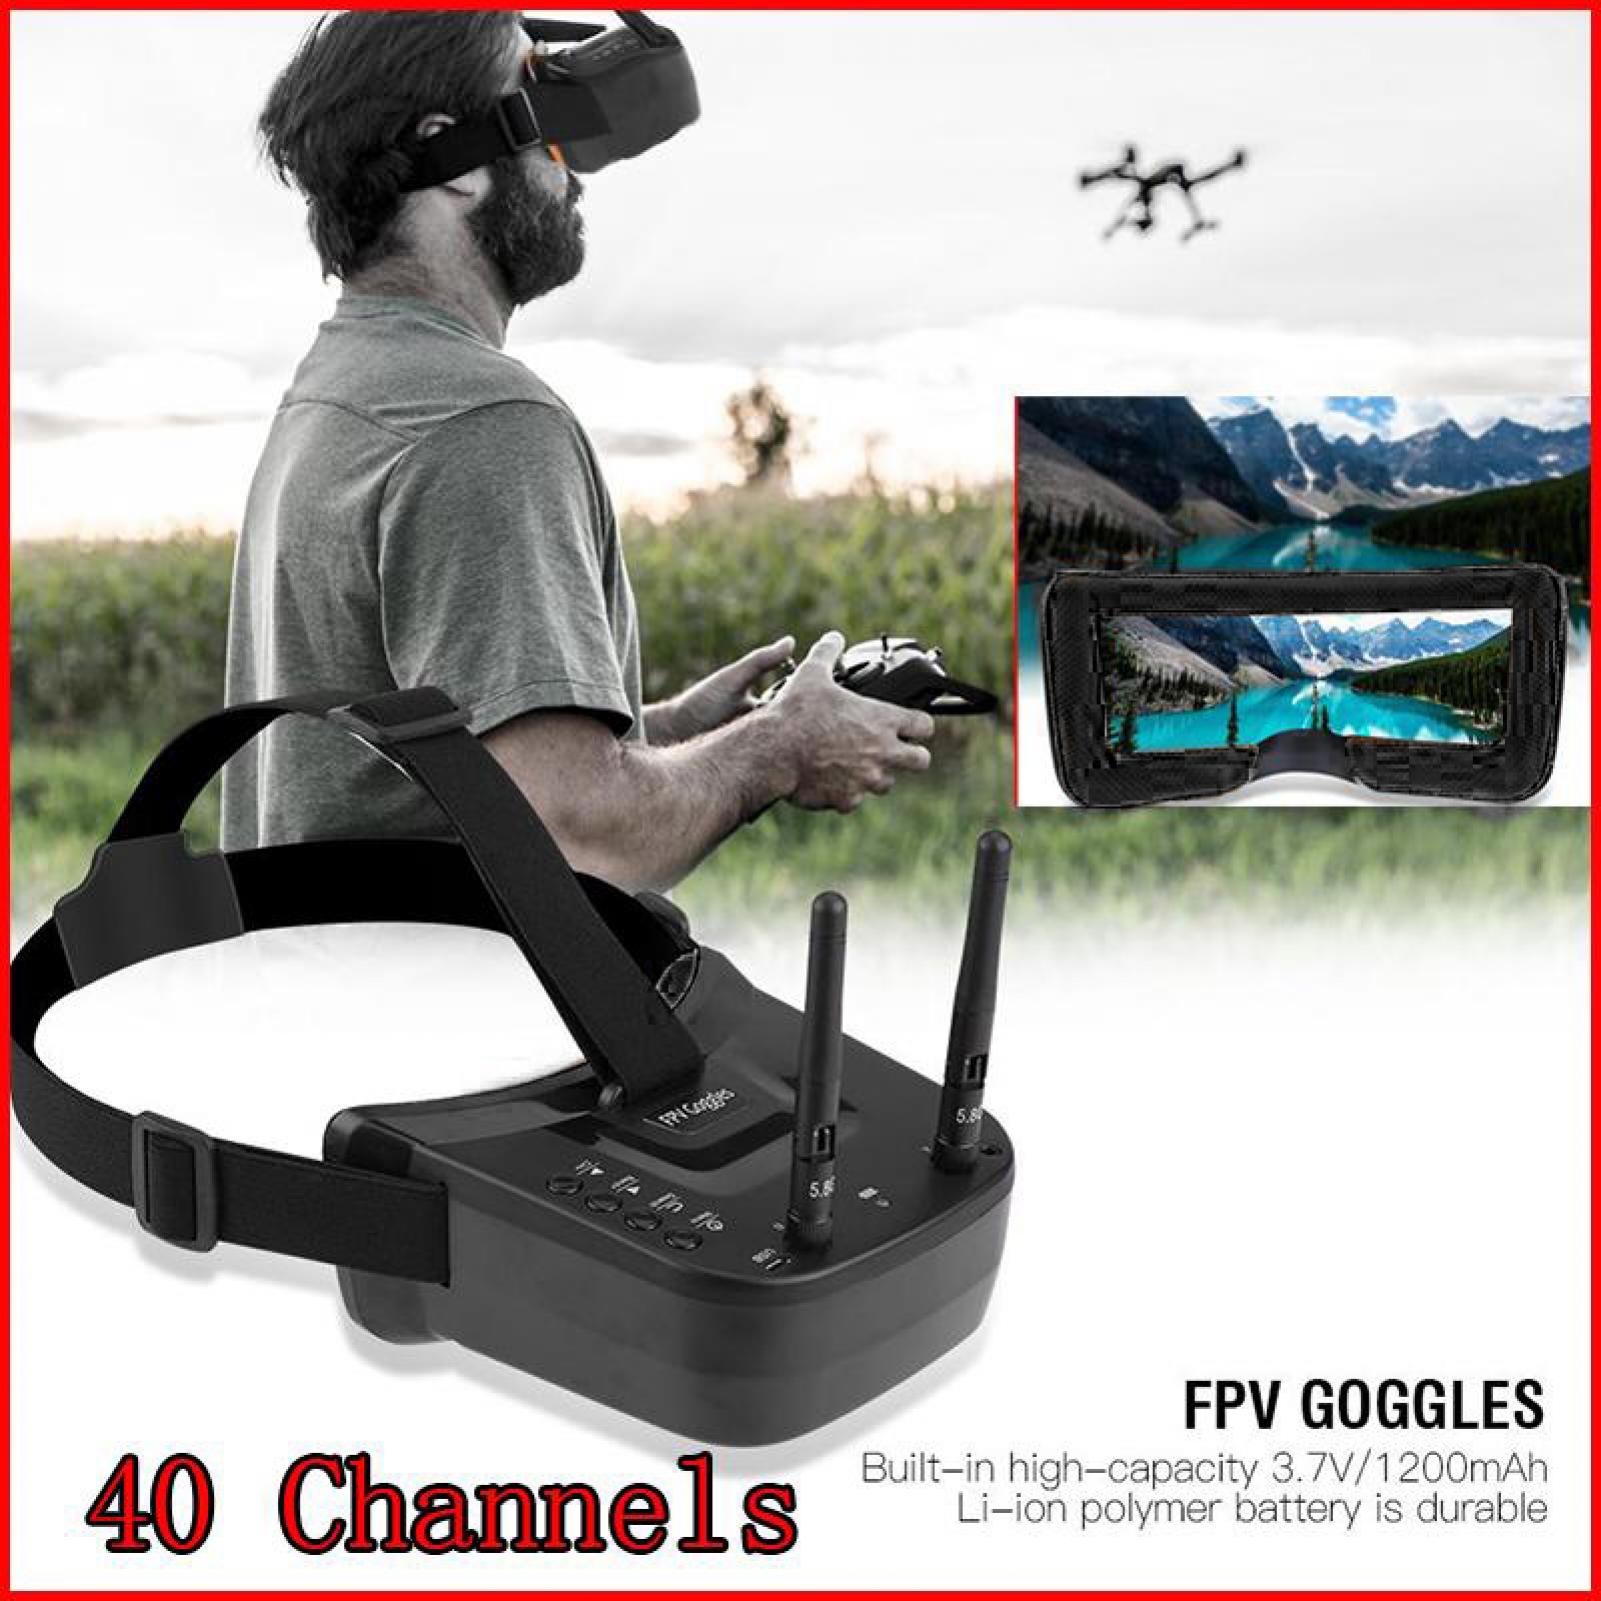 Tebru 5.8G FPV Goggles for RC Drones